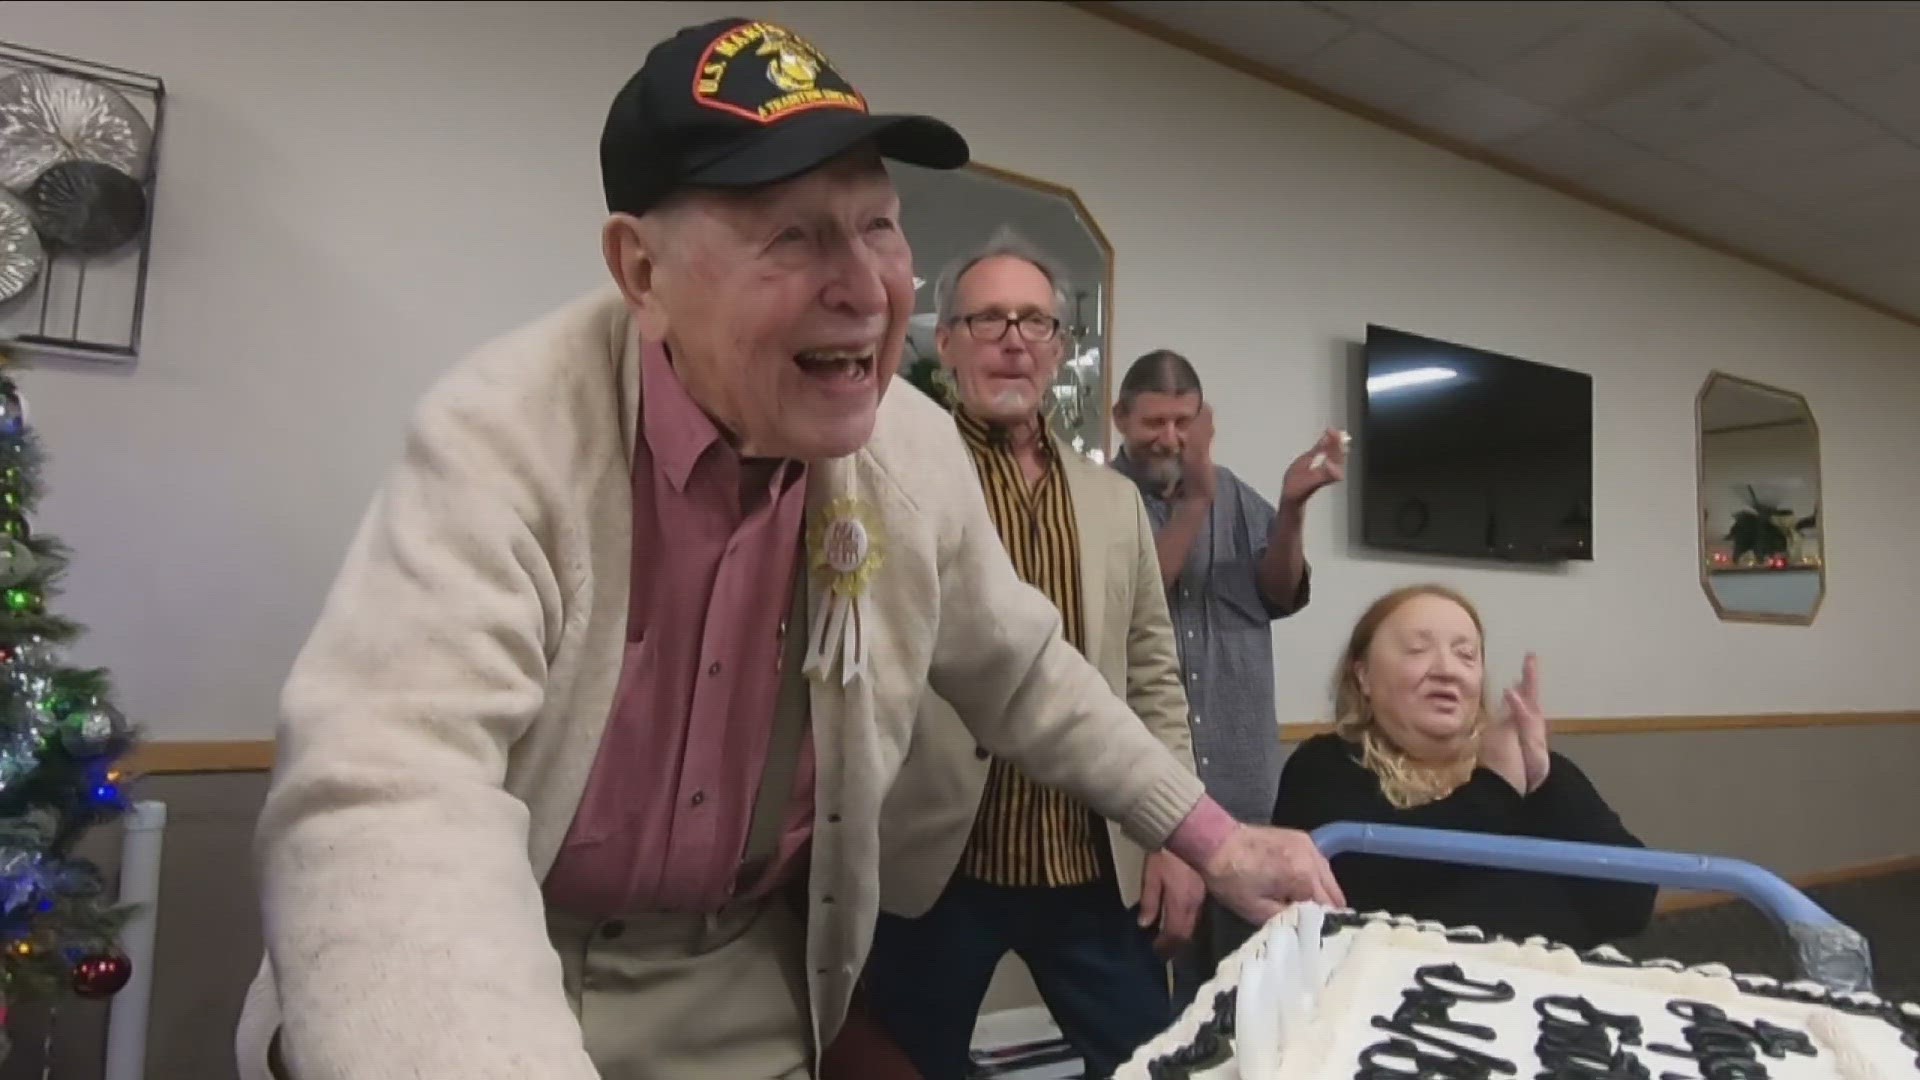 Overwhelmed by happiness as he celebrates his 100th birthday with friends and family.